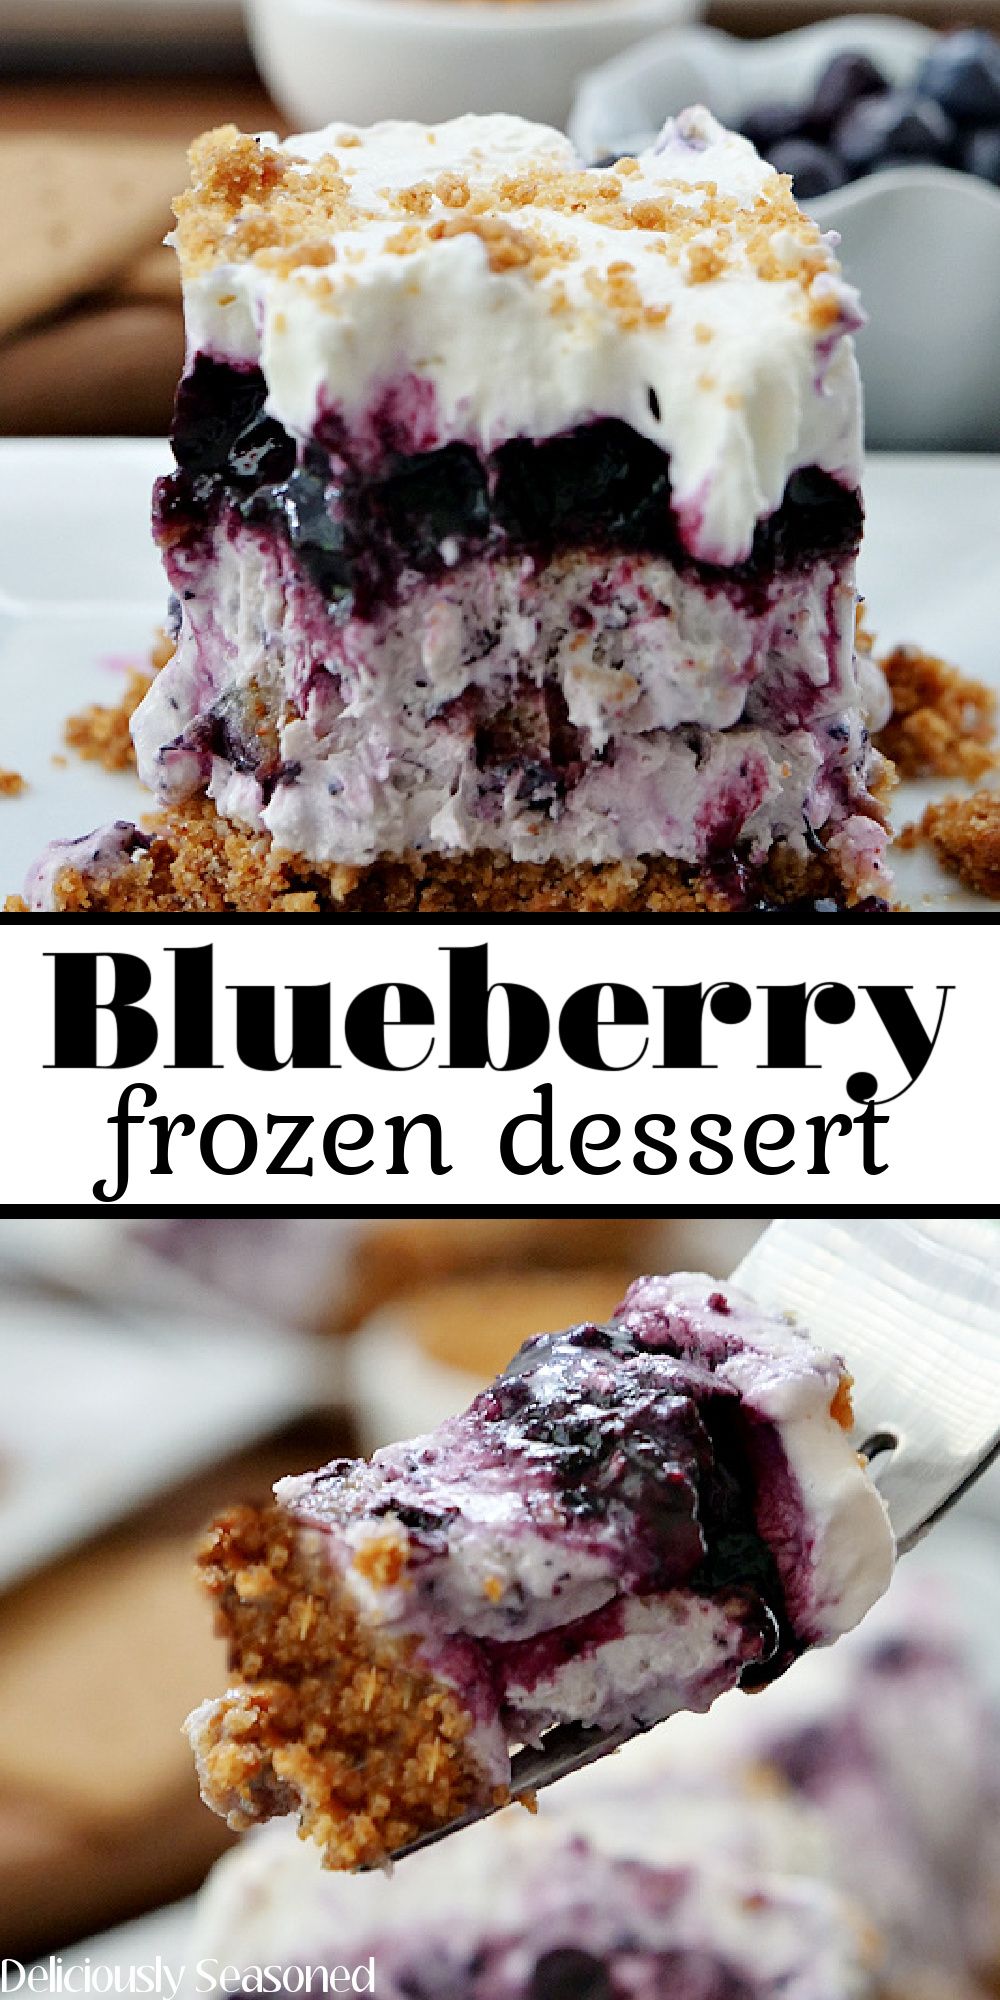 A double collage photo of frozen blueberry dessert on a white plate and a bite on a fork with the title of the recipe in the center of the photo.